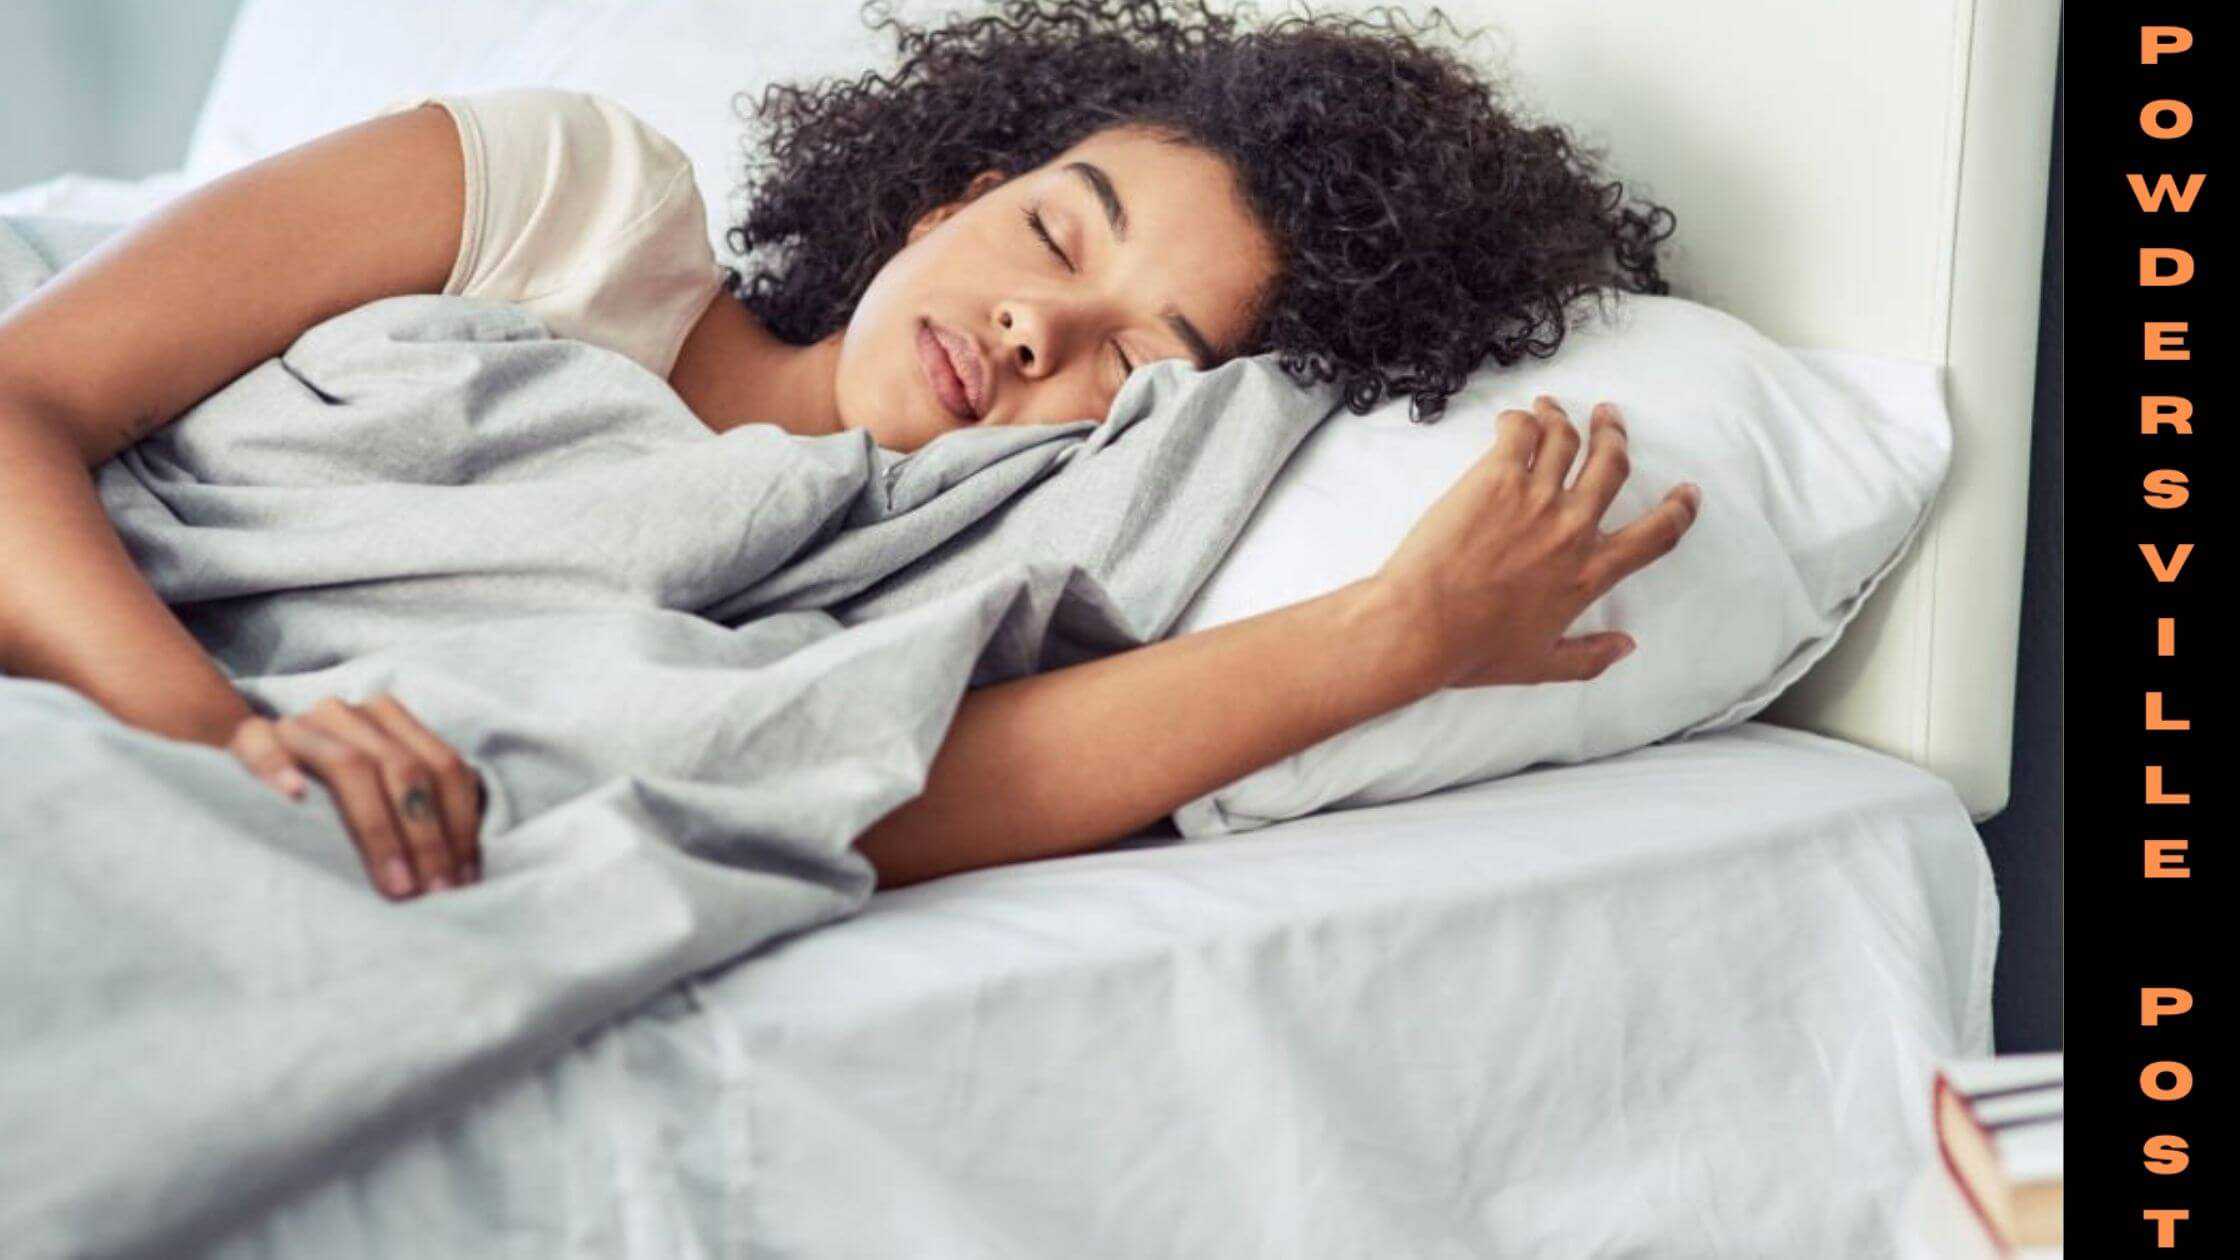 Risk For Heart Disease Could Be 1.41 Times More With Lack Of Sleep!